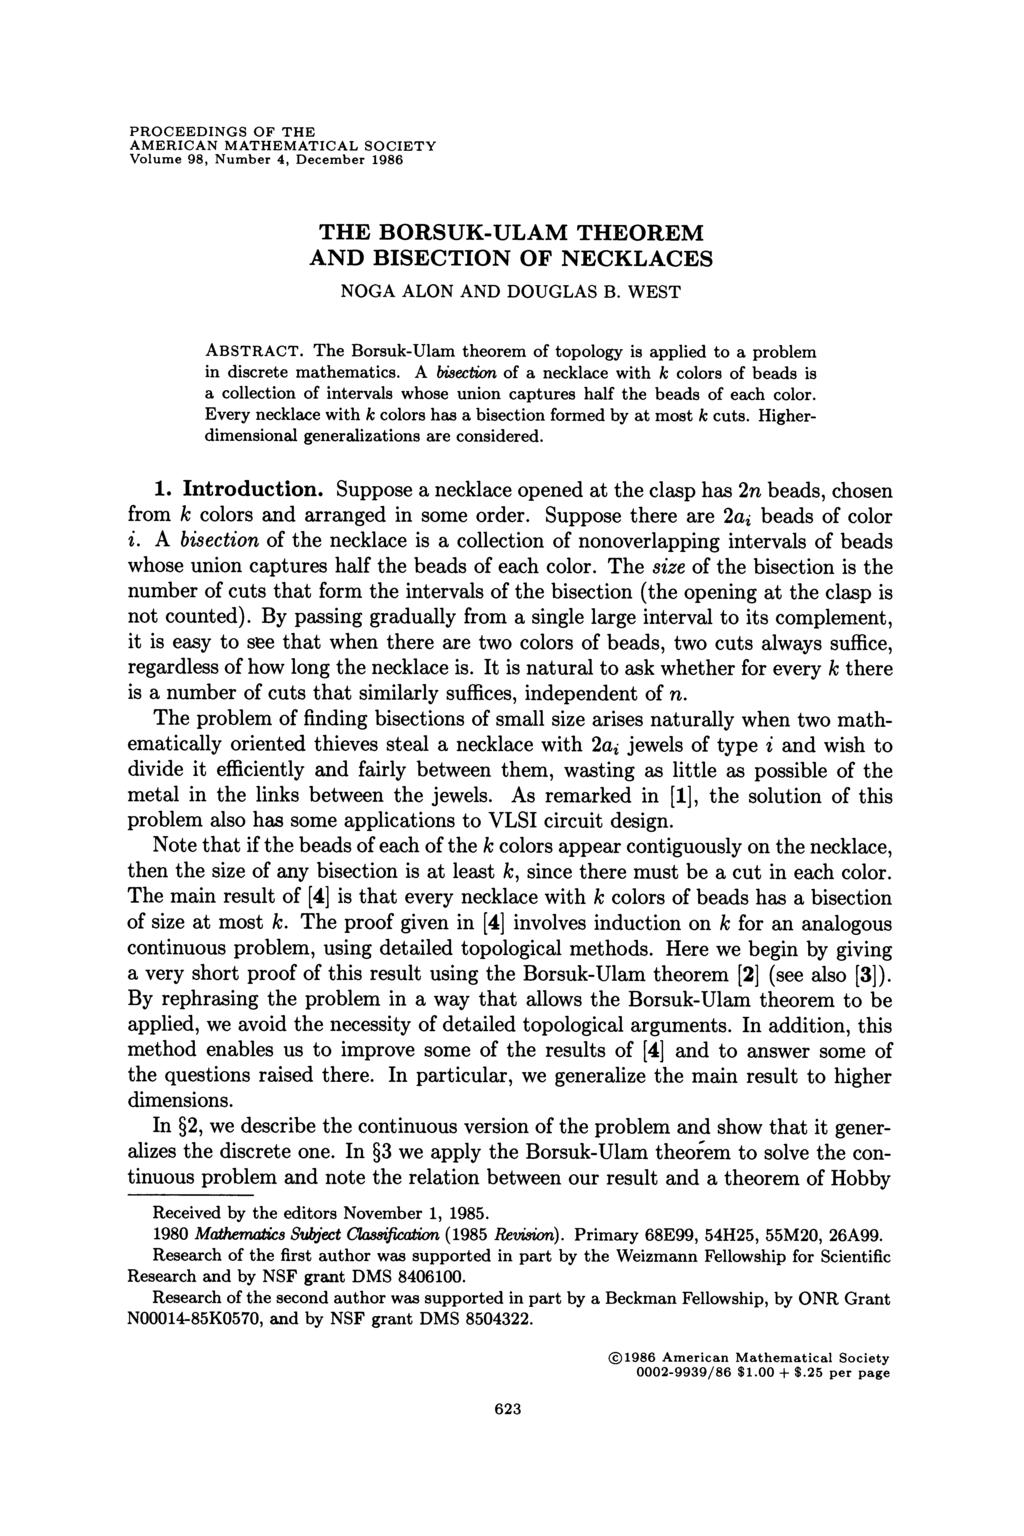 PROCEEDINGS OF THE AMERICAN MATHEMATICAL SOCIETY Volume 98, Number 4, December 1986 THE BORSUK-ULAM THEOREM AND BISECTION OF NECKLACES NOGA ALON AND DOUGLAS B. WEST ABSTRACT.